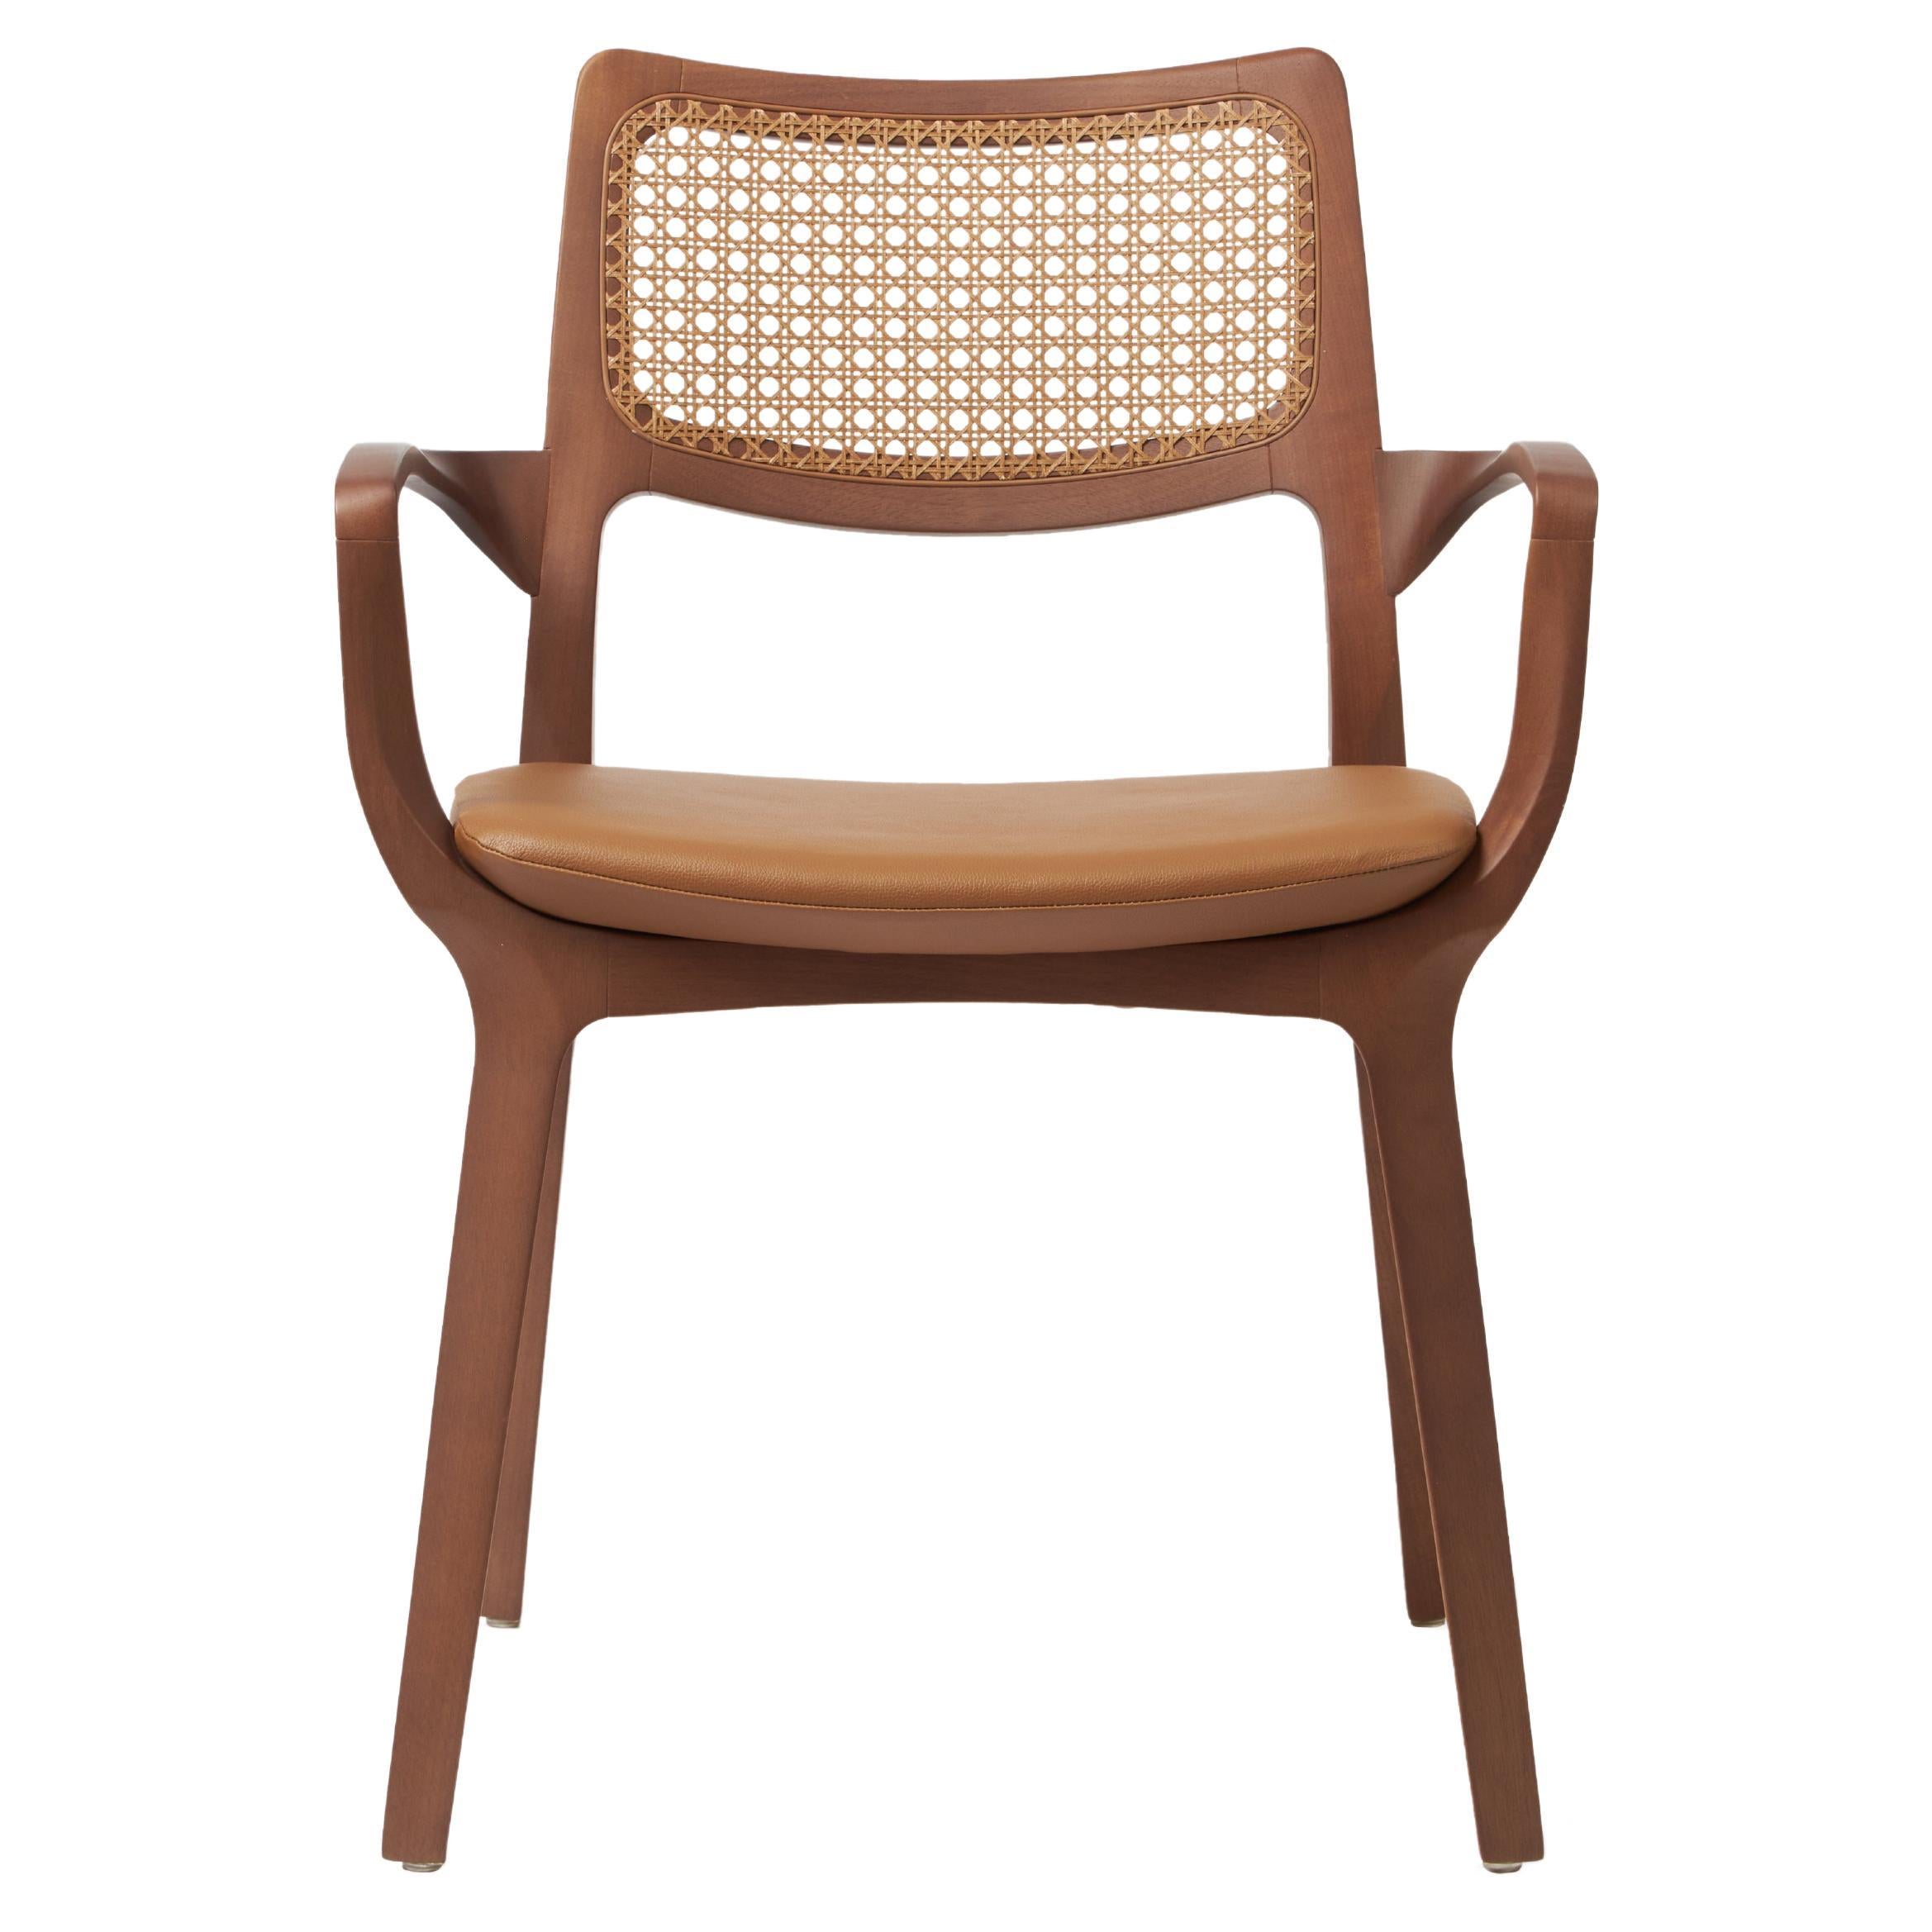 The Moderns Aurora Chair Sculptured in Walnut Finish Arms, leather seating, cane en vente